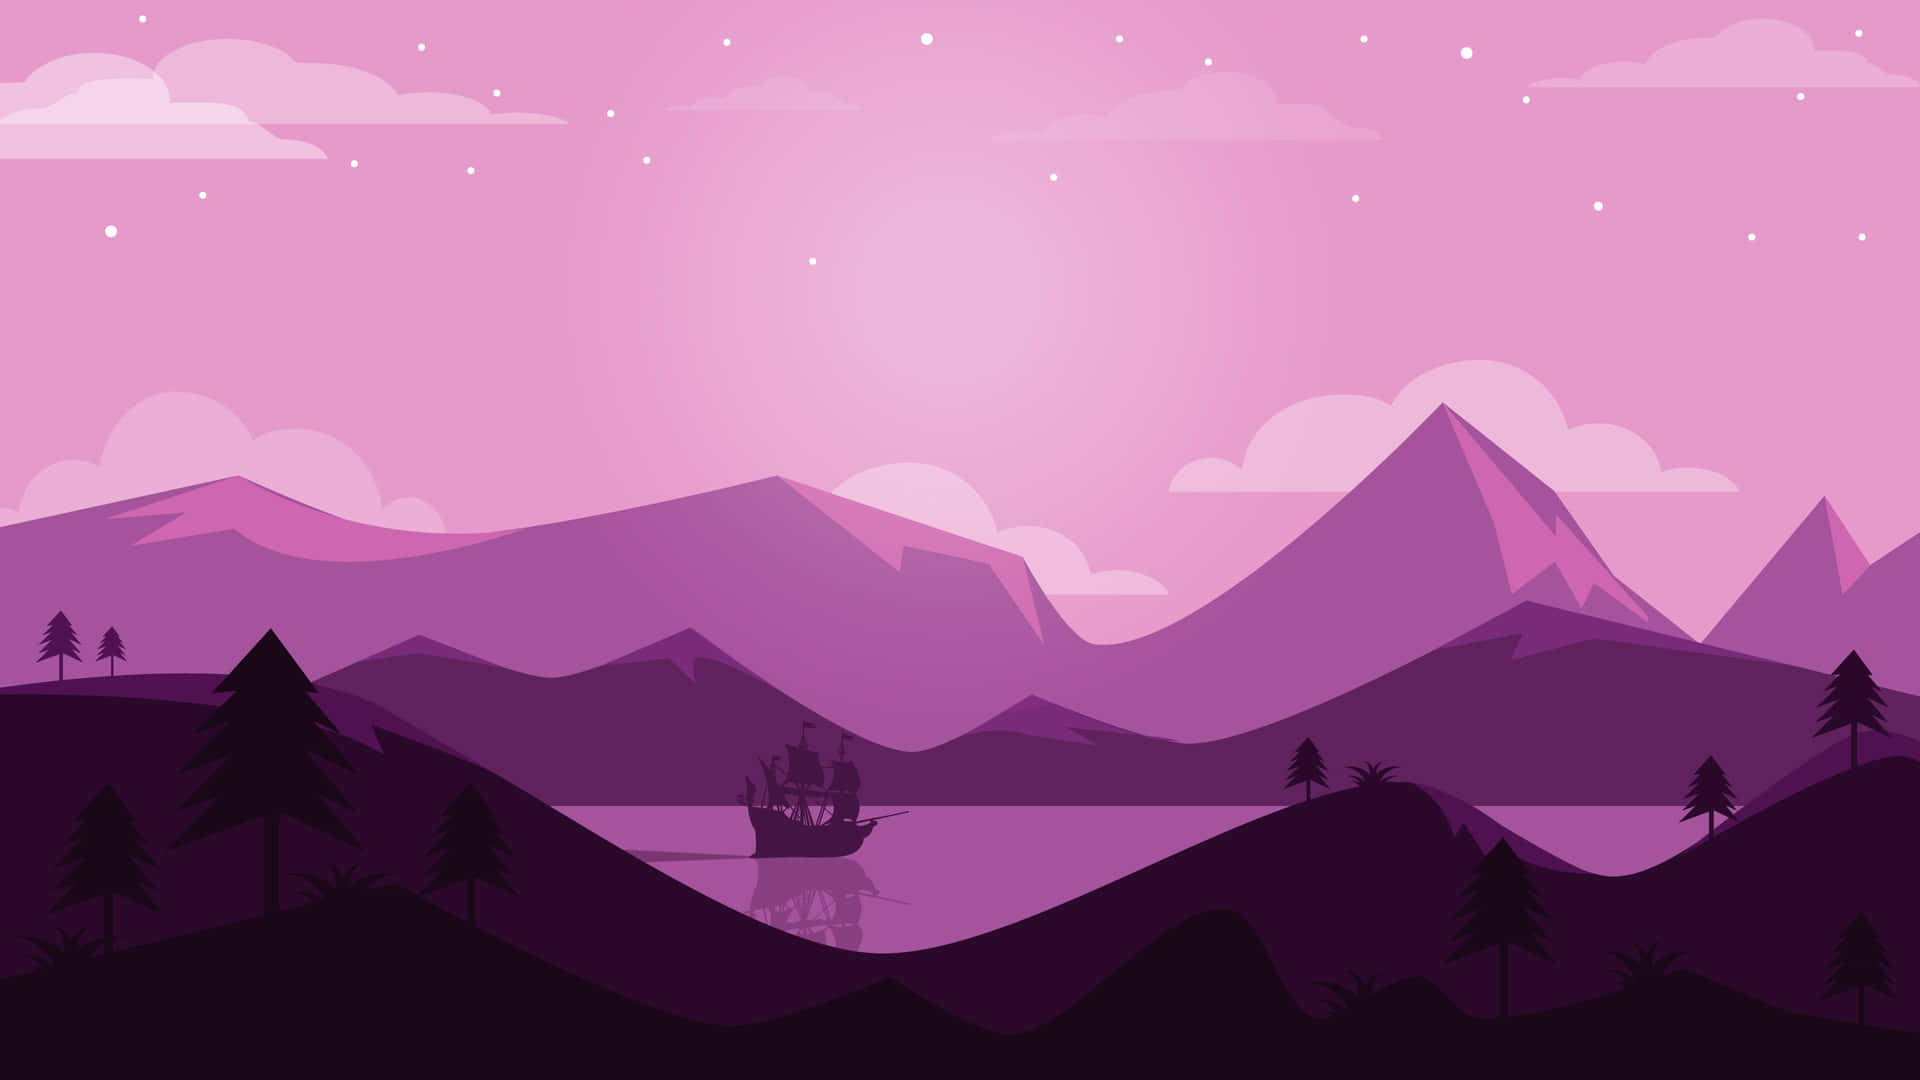 A brilliant and aesthetic abstract minimalistic illustration with a captivating purple hue Wallpaper